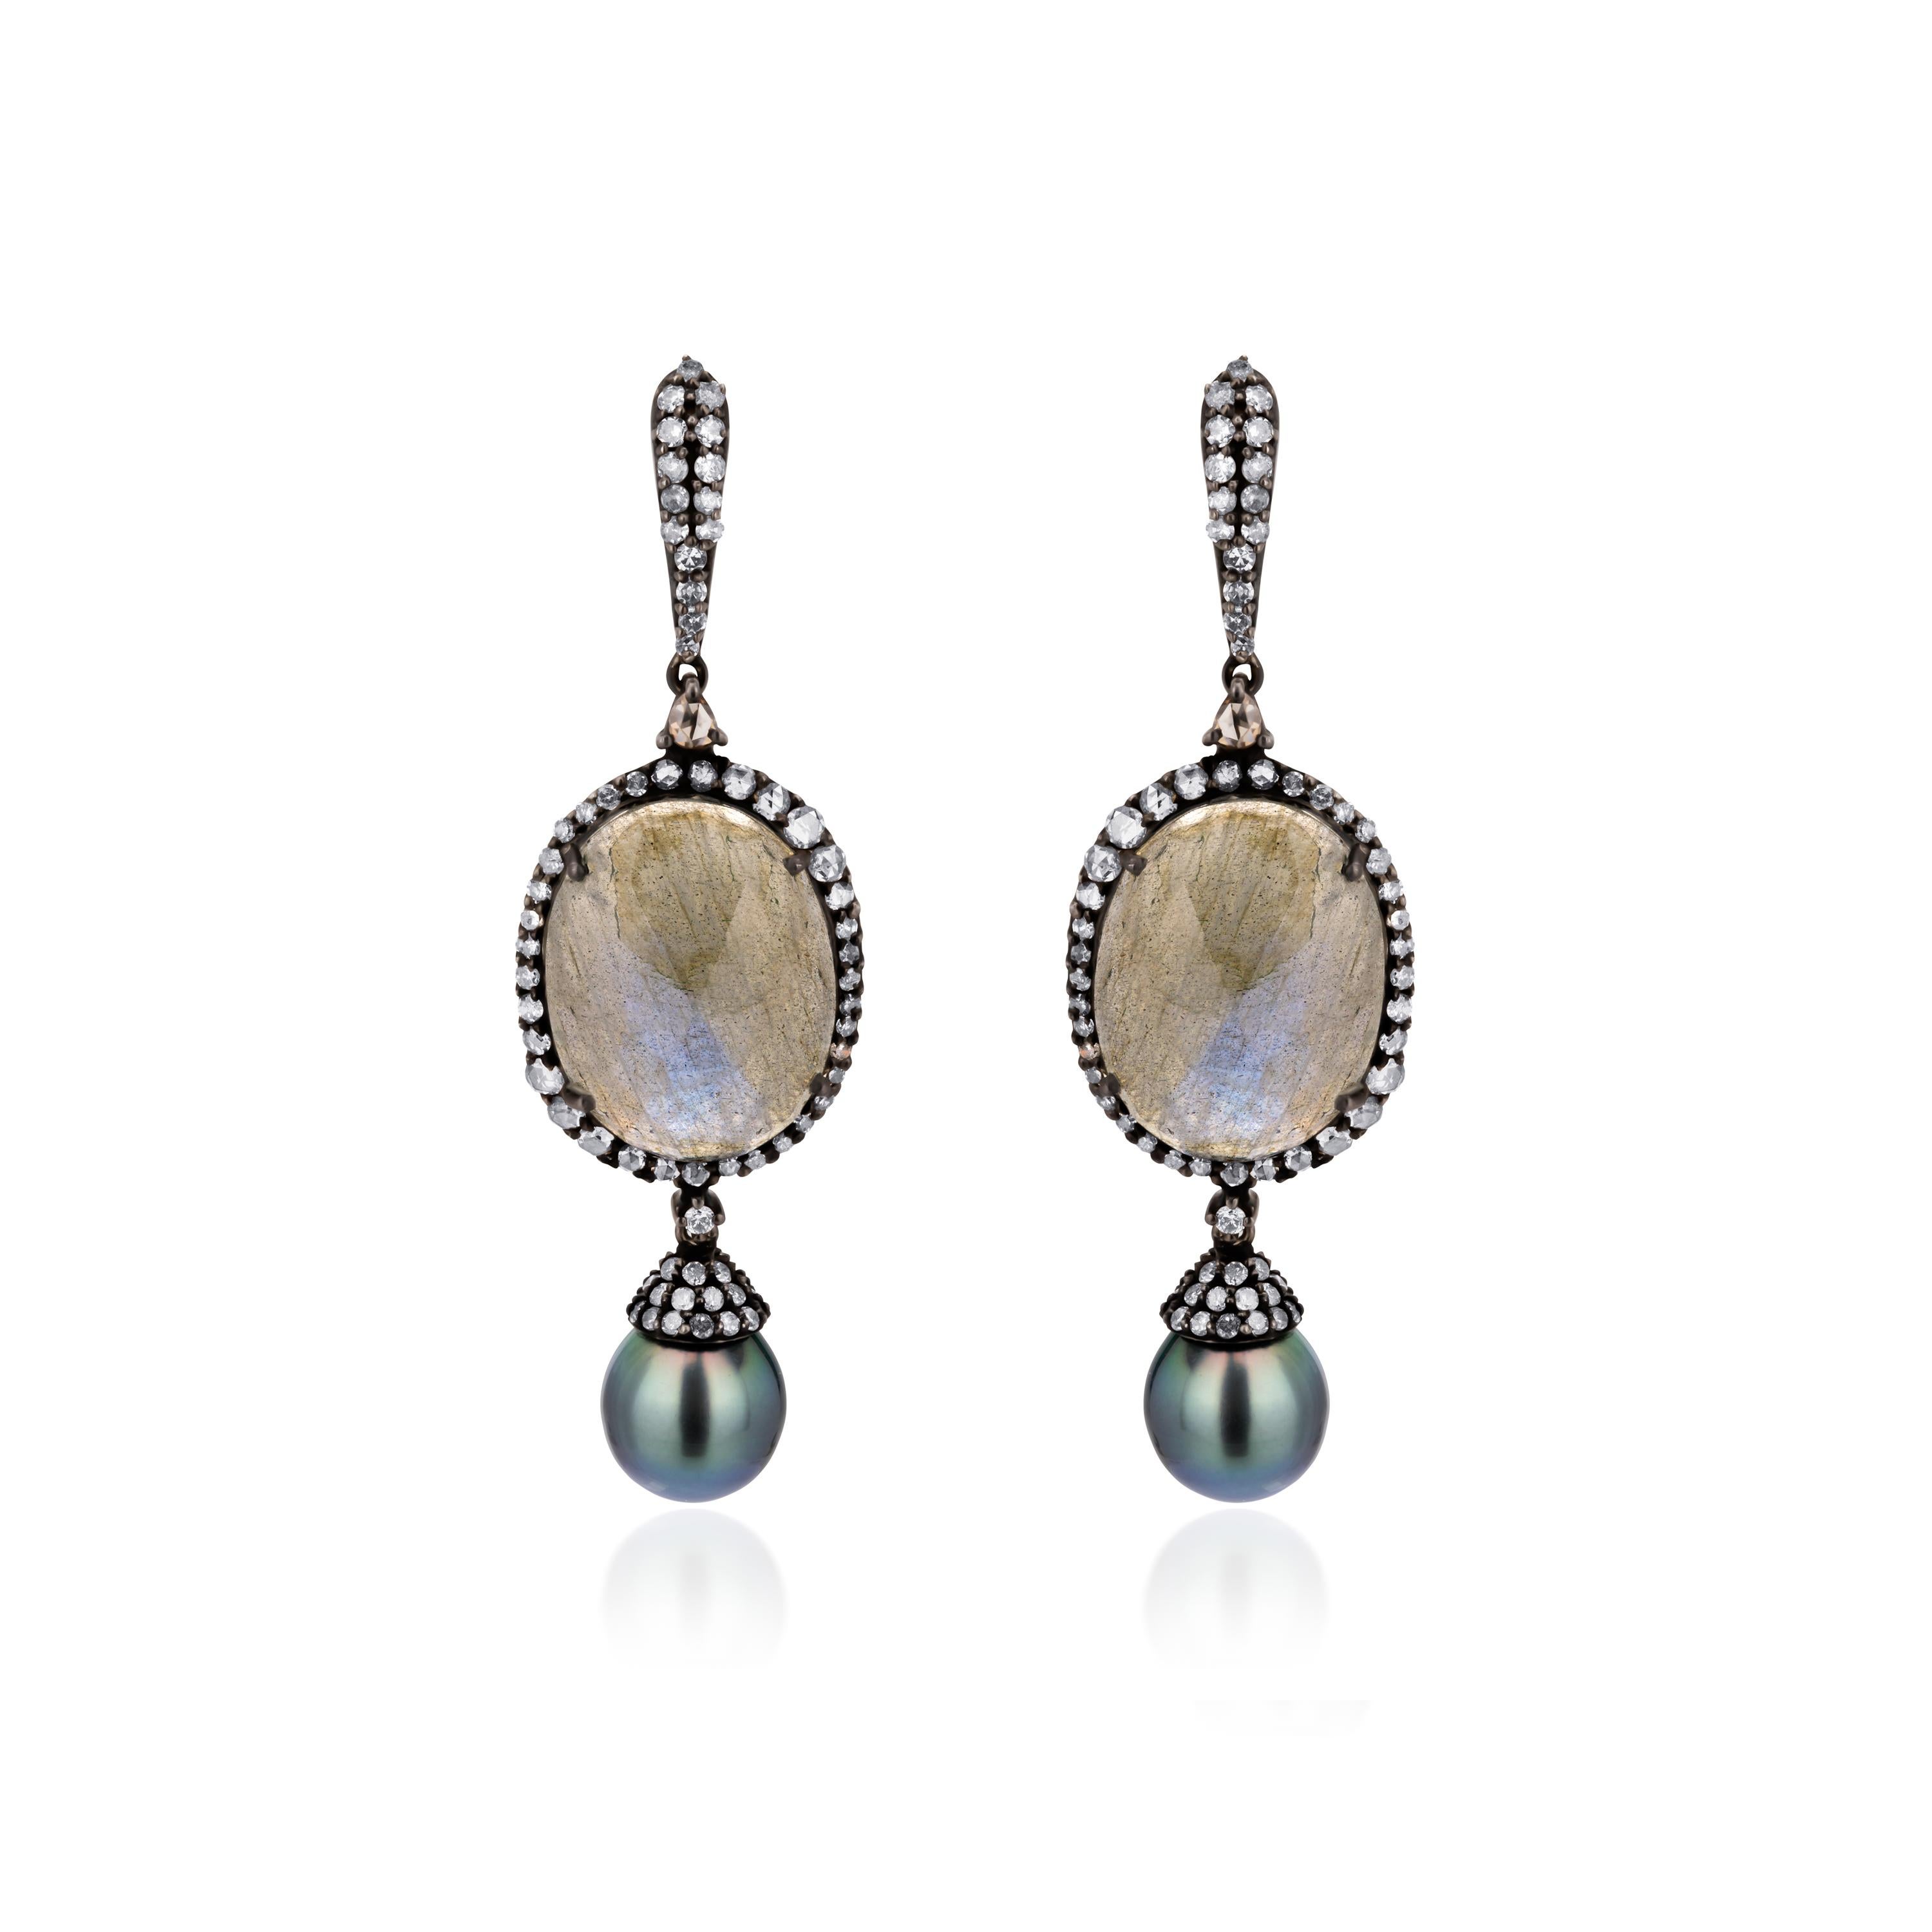 Soft and elegant, feminine beauty radiates from these fabulous Victorian ear drops. Masterfully created in 18K gold and 925 sterling silver each earring showcase an oval labradorite framed within diamonds culminating in tender pearl drops. A